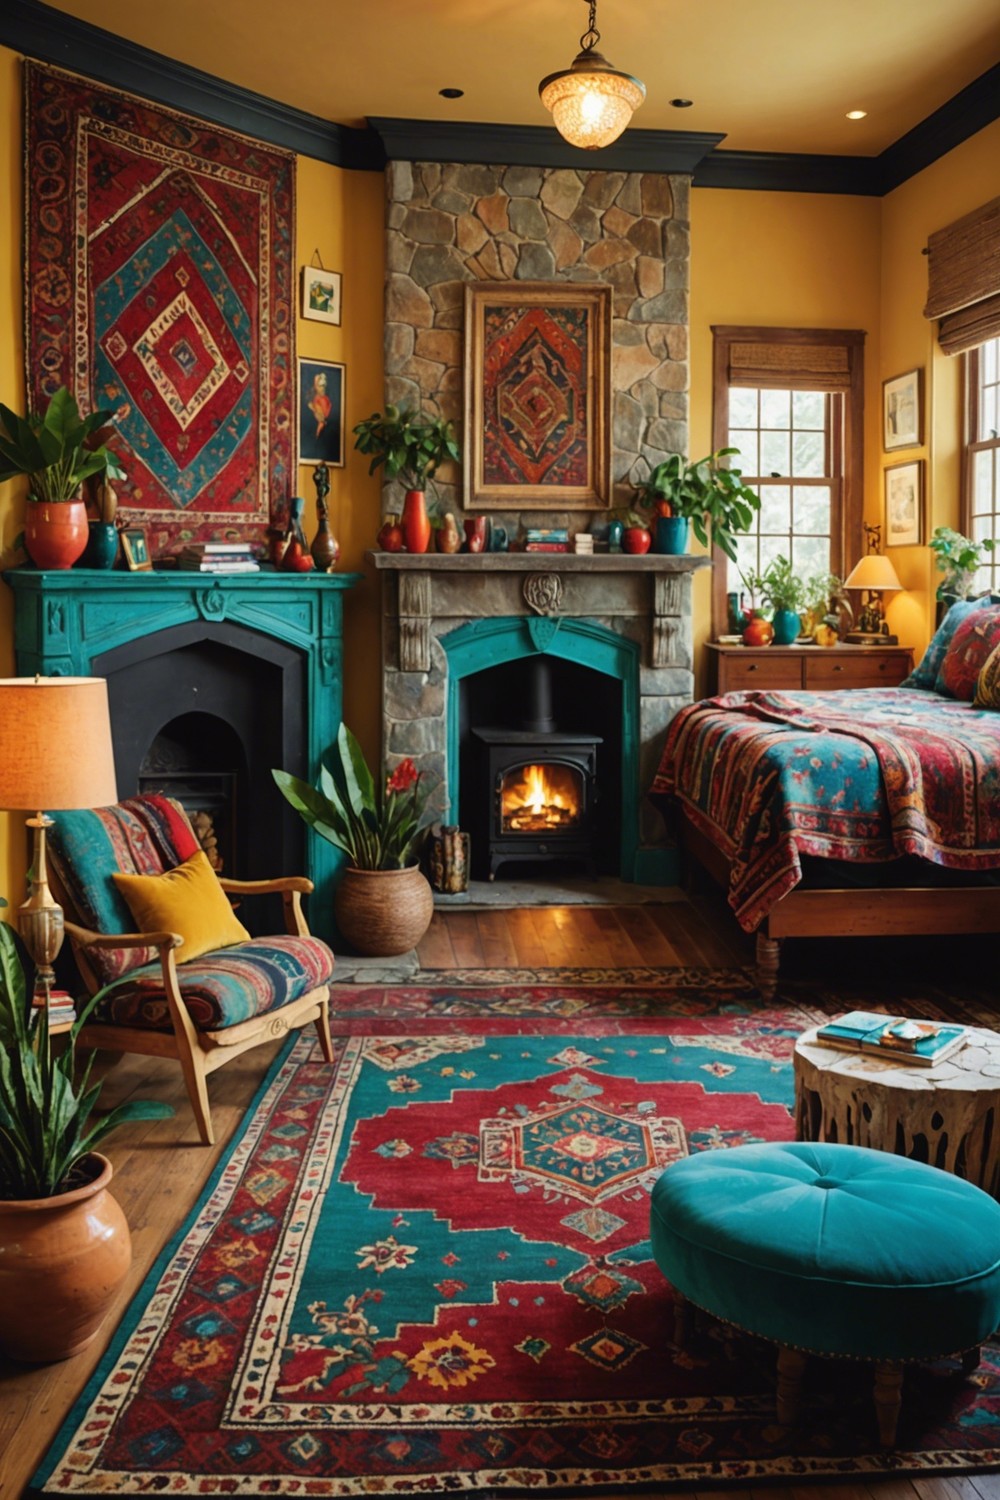 Fireplace Focal Point with Patterned Rugs: